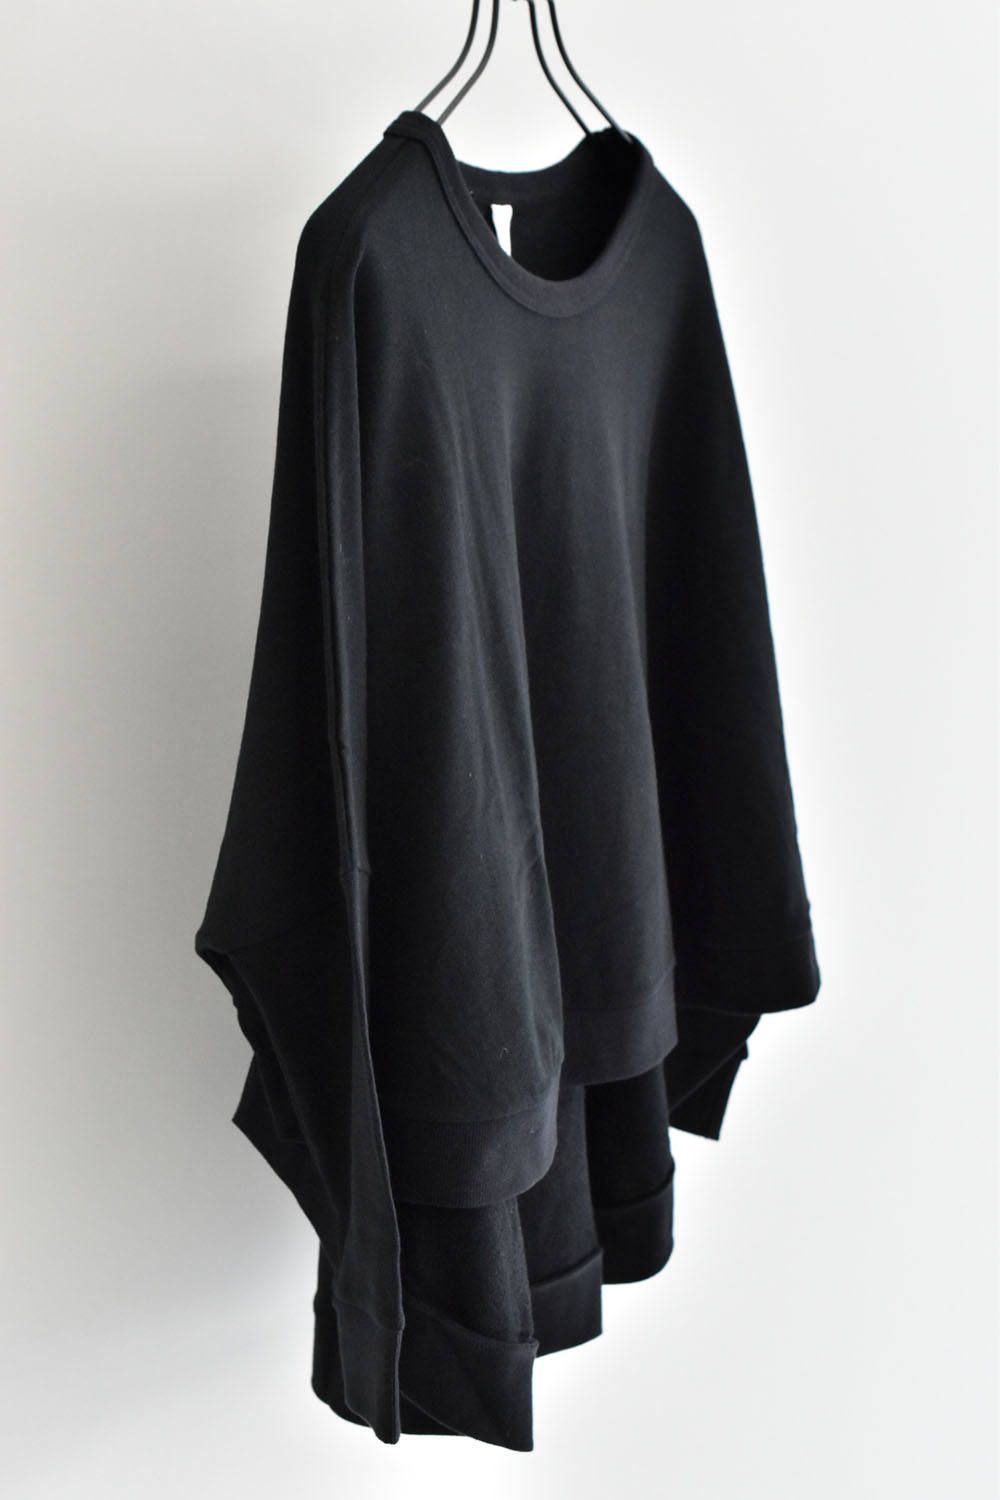 Wide pullover"Black"/レディースアイテム